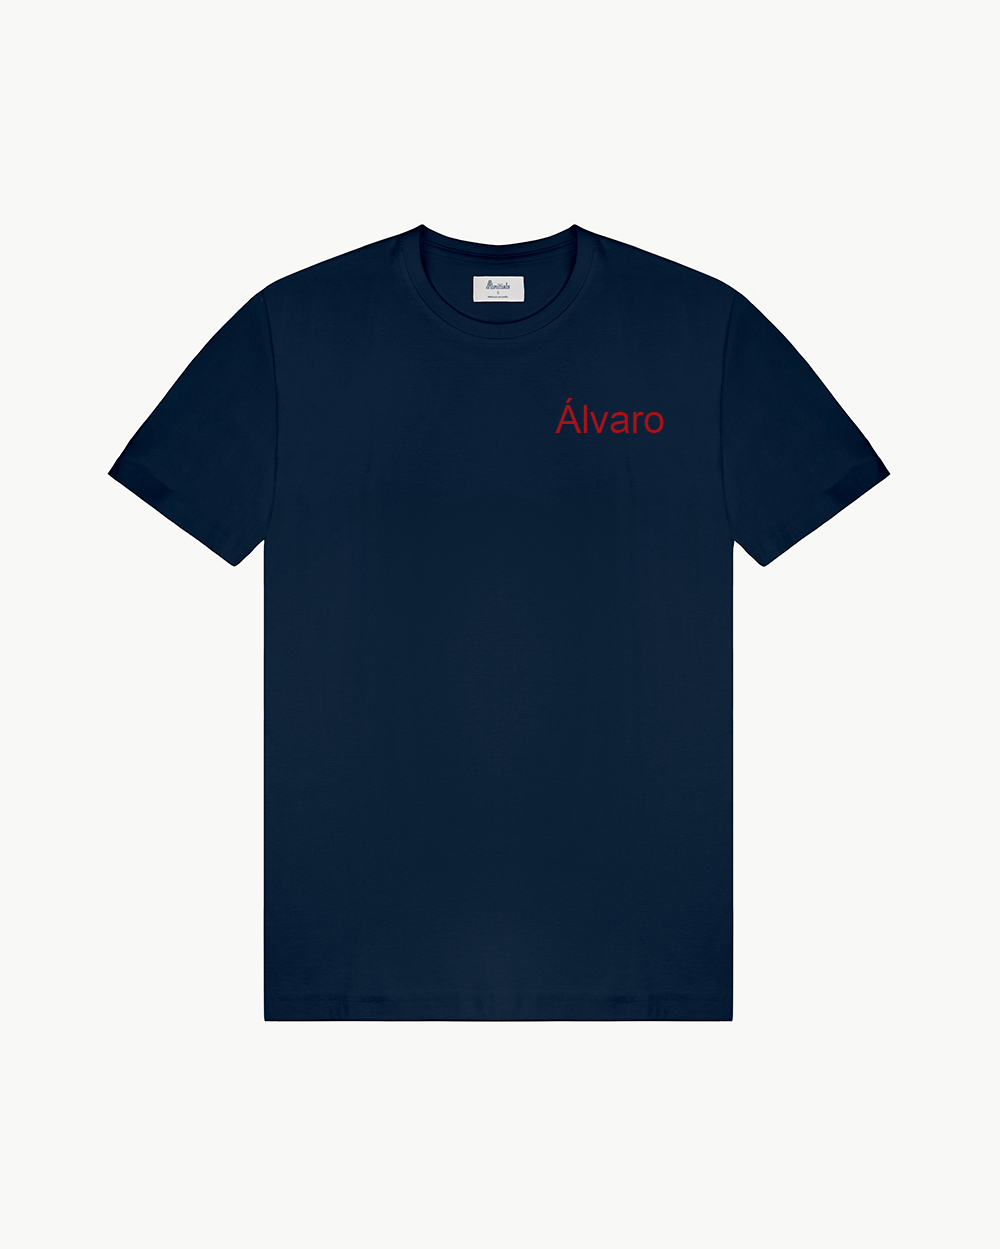 KIDS - NAVY BLUE T-SHIRT | PERSONALIZED